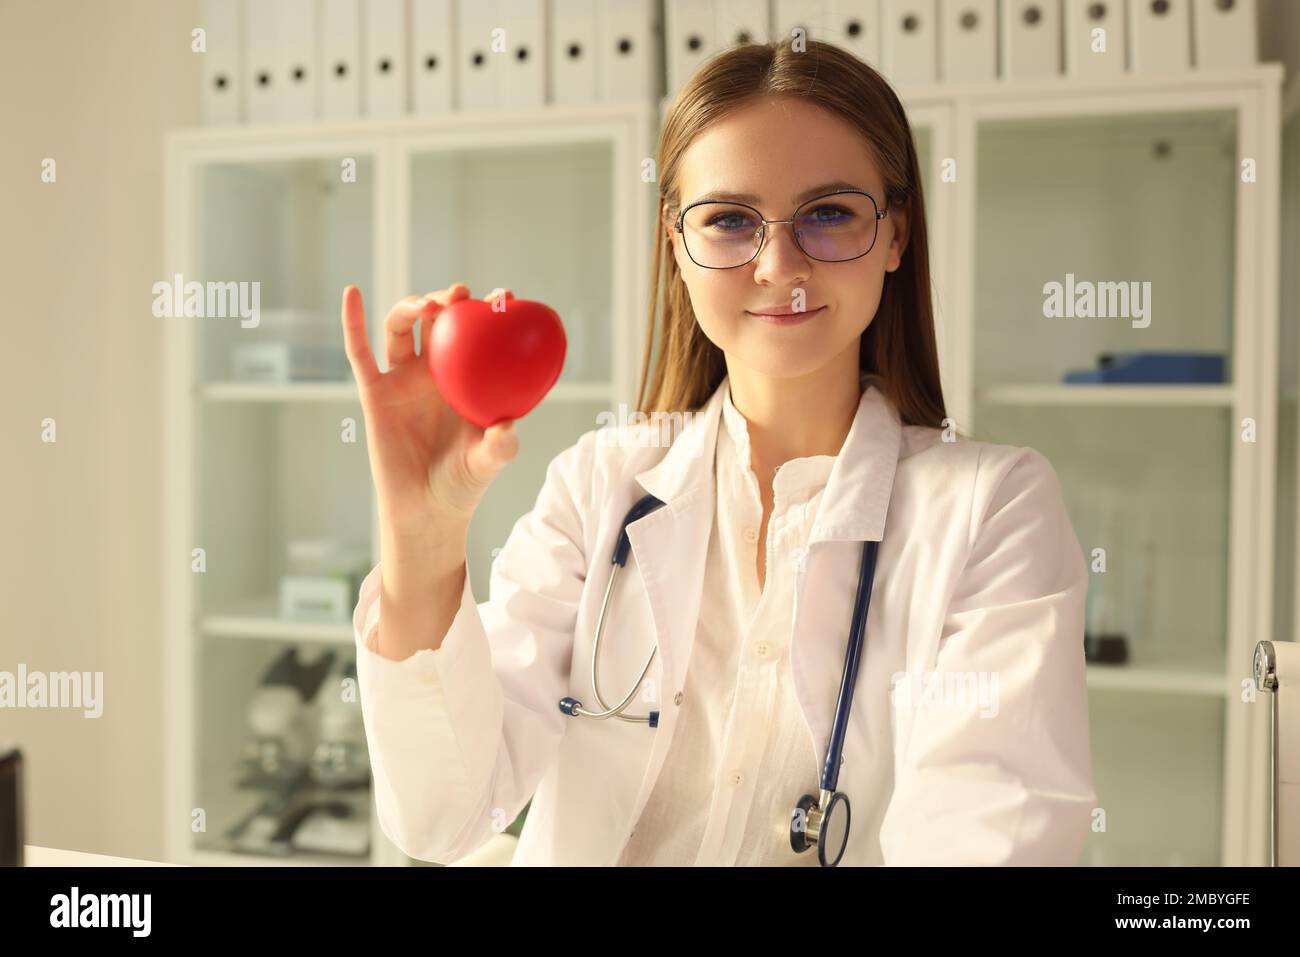 Doctor cardiologist holding red toy heart in clinic Stock Photo